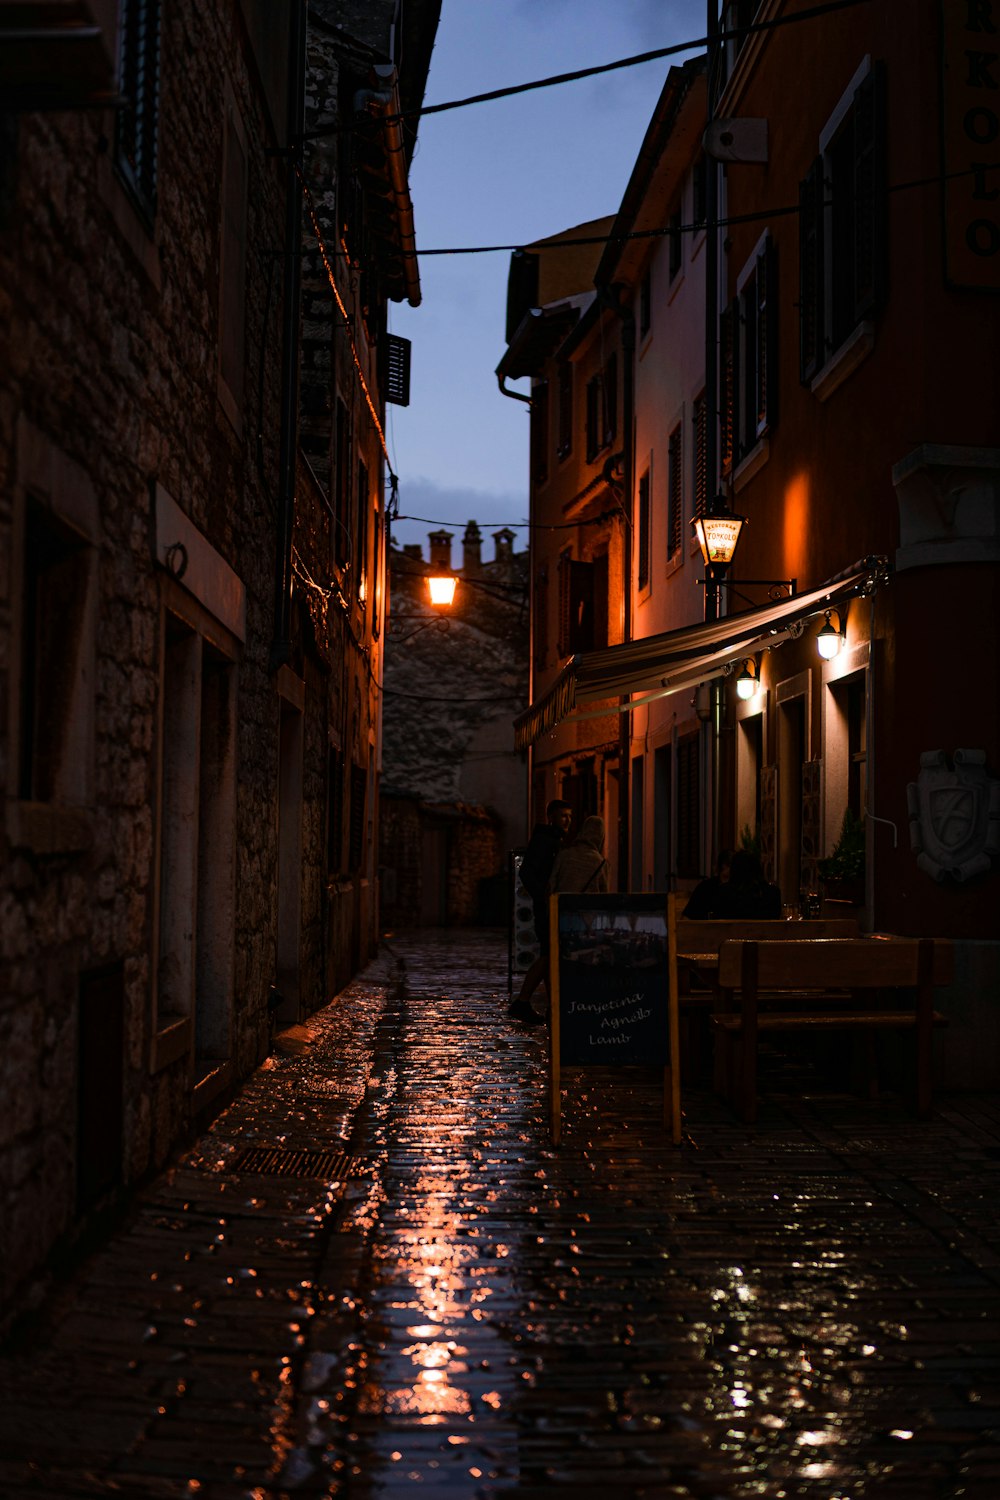 a dark alley way with a bench and street lights